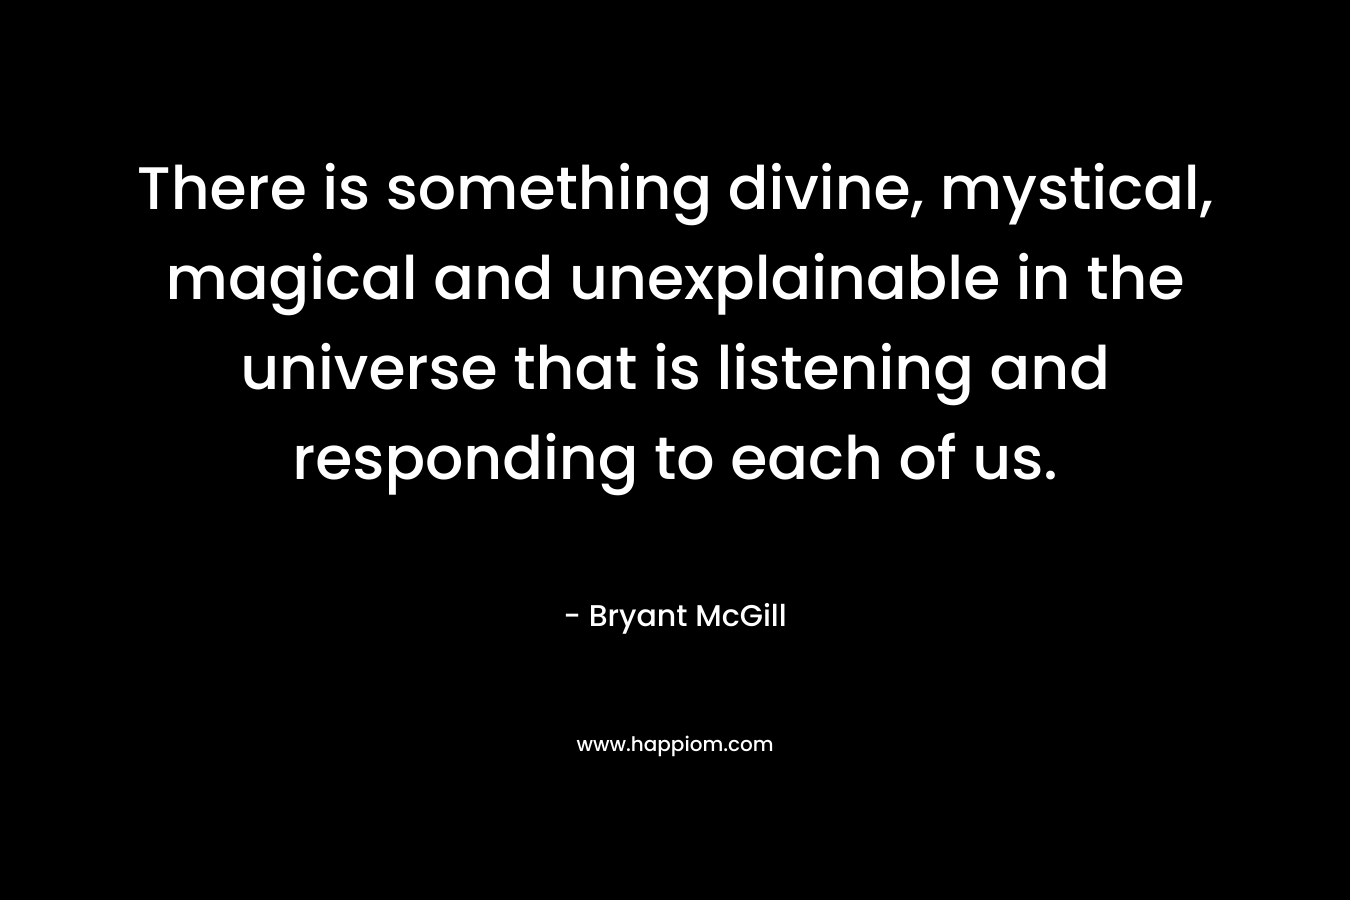 There is something divine, mystical, magical and unexplainable in the universe that is listening and responding to each of us. – Bryant McGill